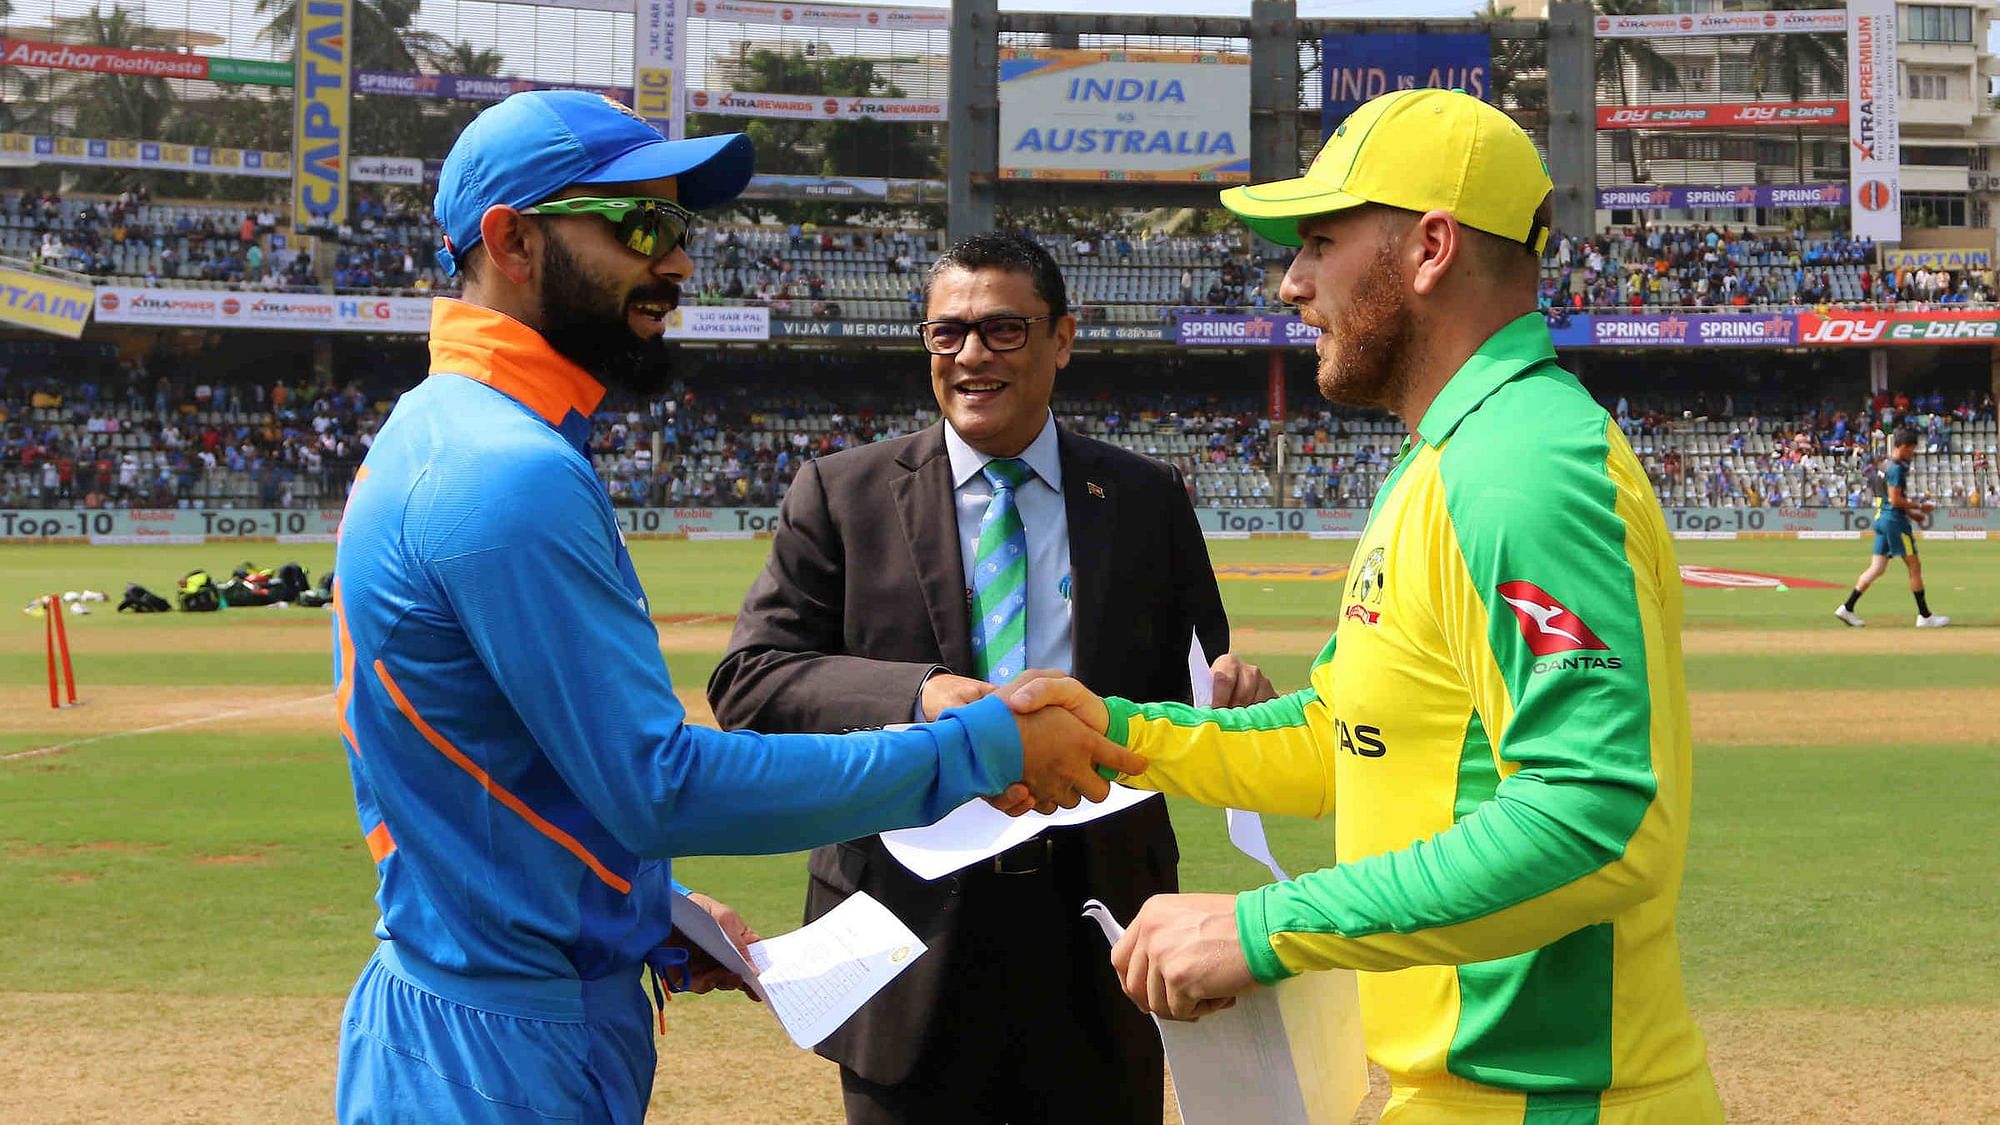 India versus Australia&nbsp; (IND vs AUS) 1st ODI Cricket Match: Check where to watch Live telecast streaming online and on TV